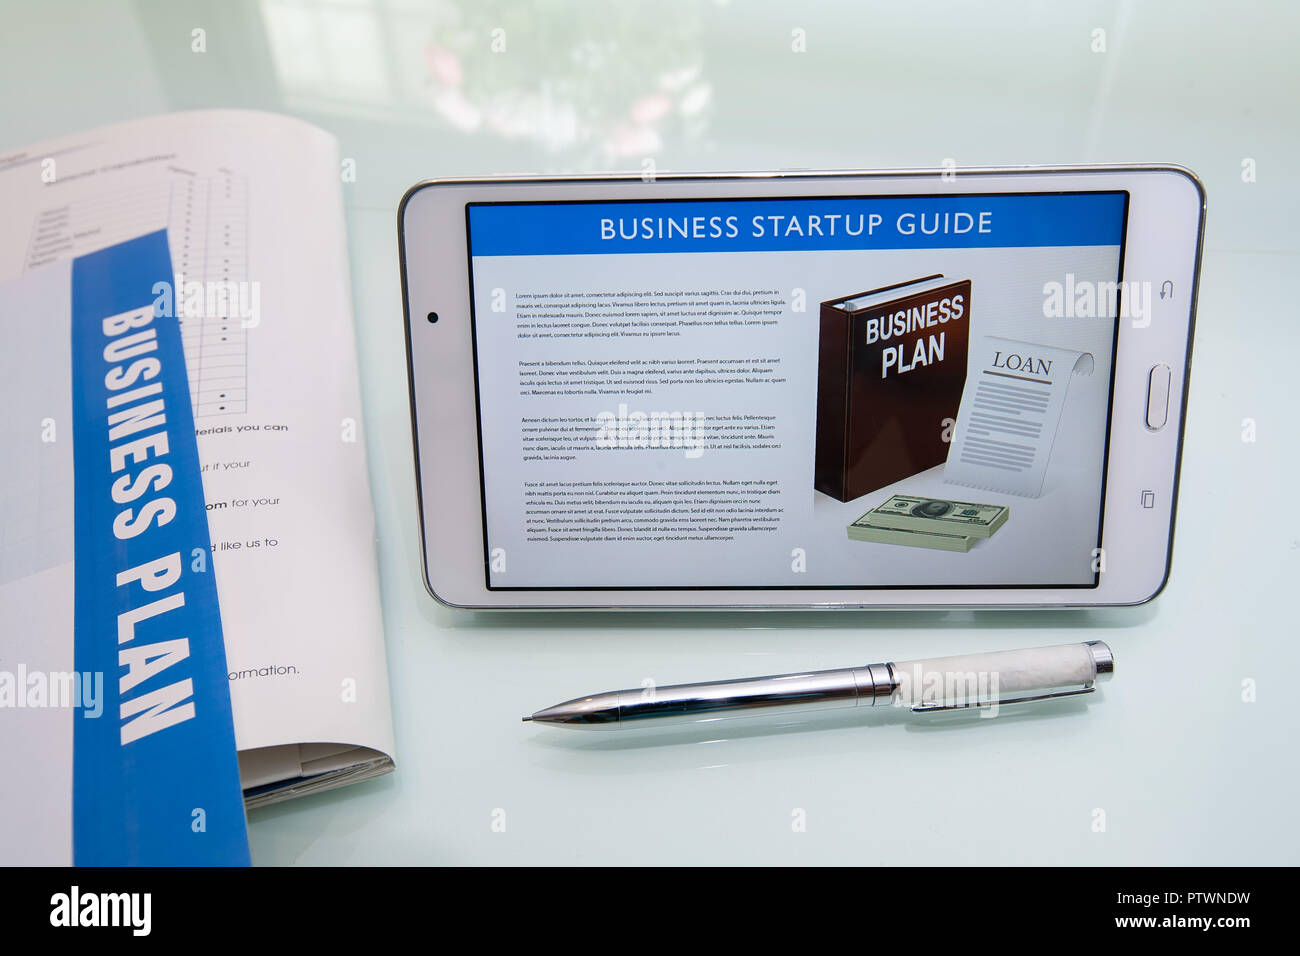 Writing a business plan using a business startup guide, printed collateral, pen, and tablet or mobile device on a reflective glass desk. Stock Photo